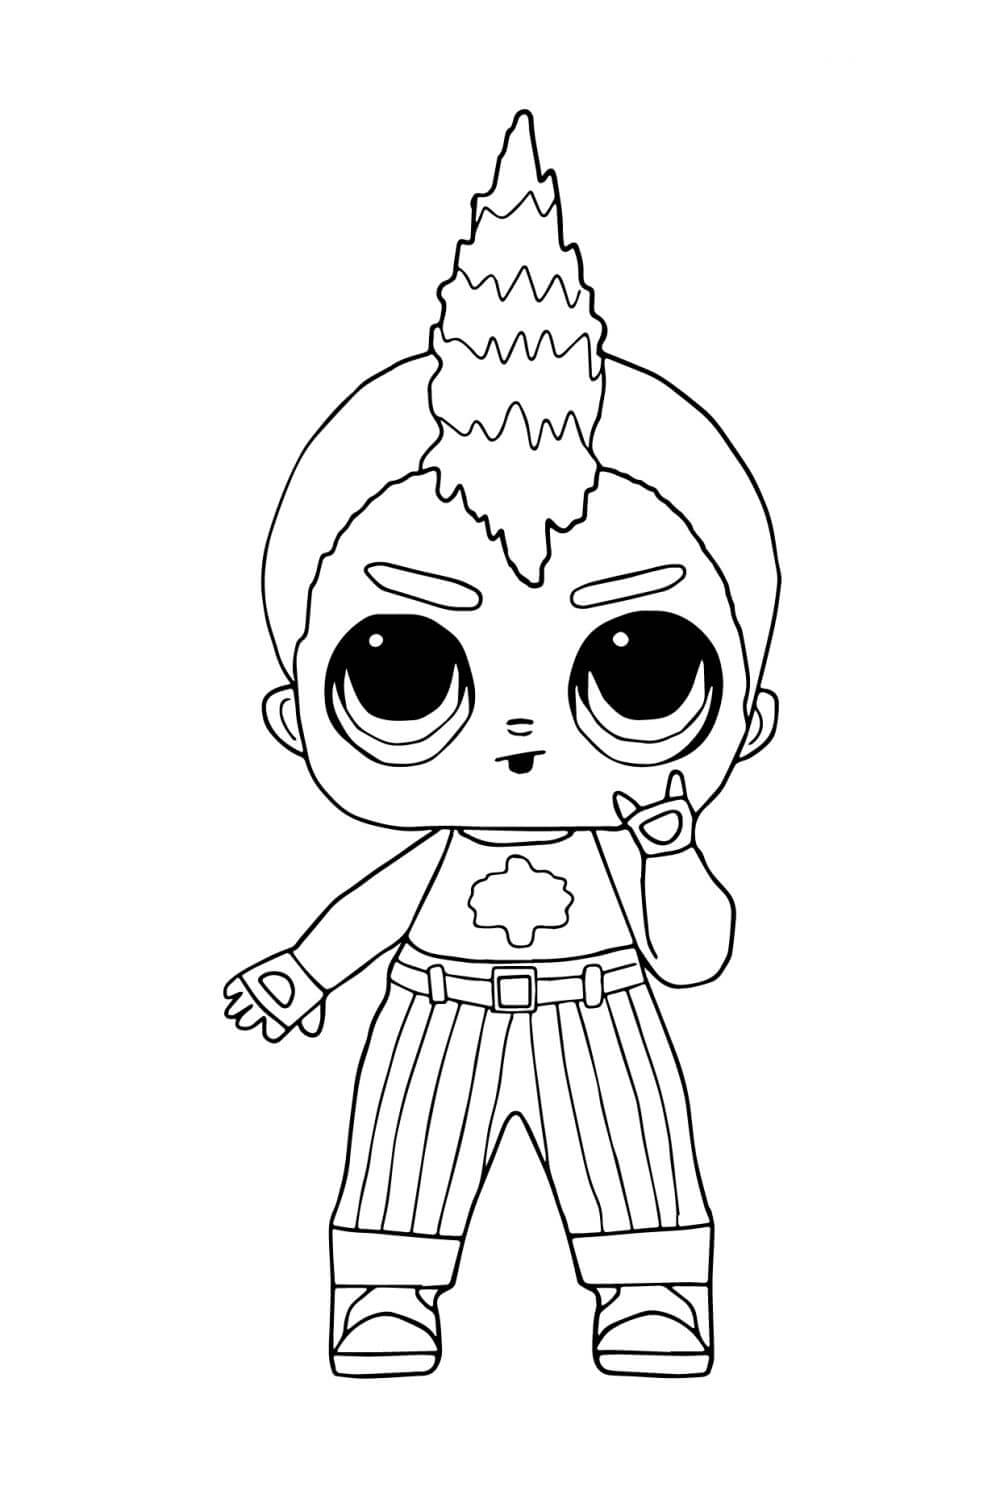 Nightfall LOL Boys Coloring Page   Free Printable Coloring Pages ...